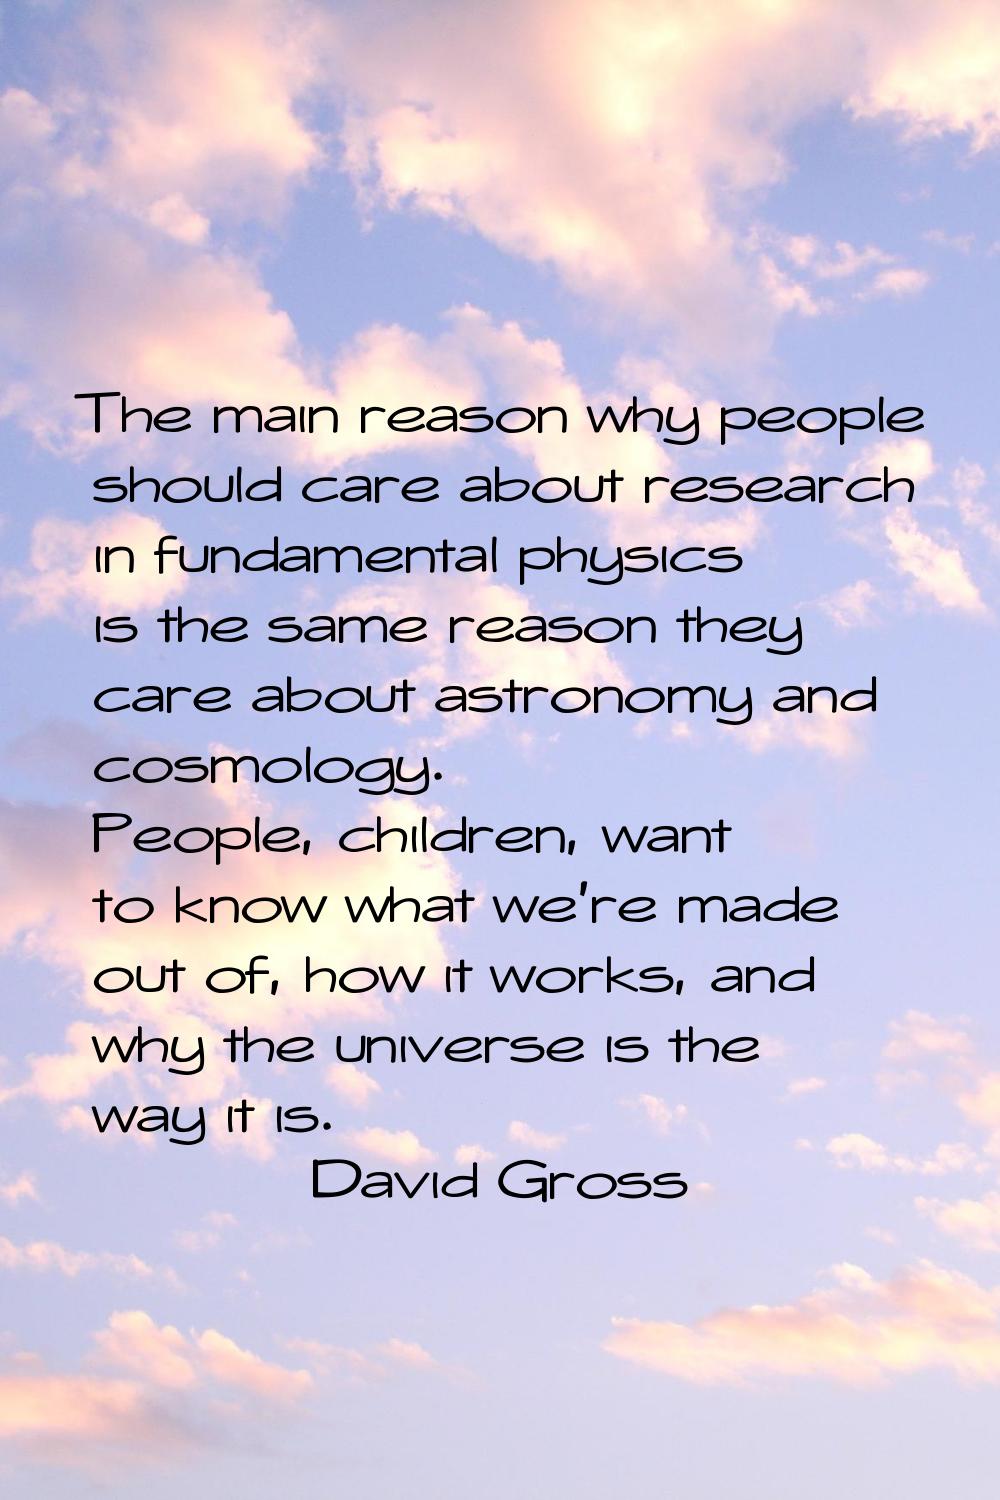 The main reason why people should care about research in fundamental physics is the same reason the